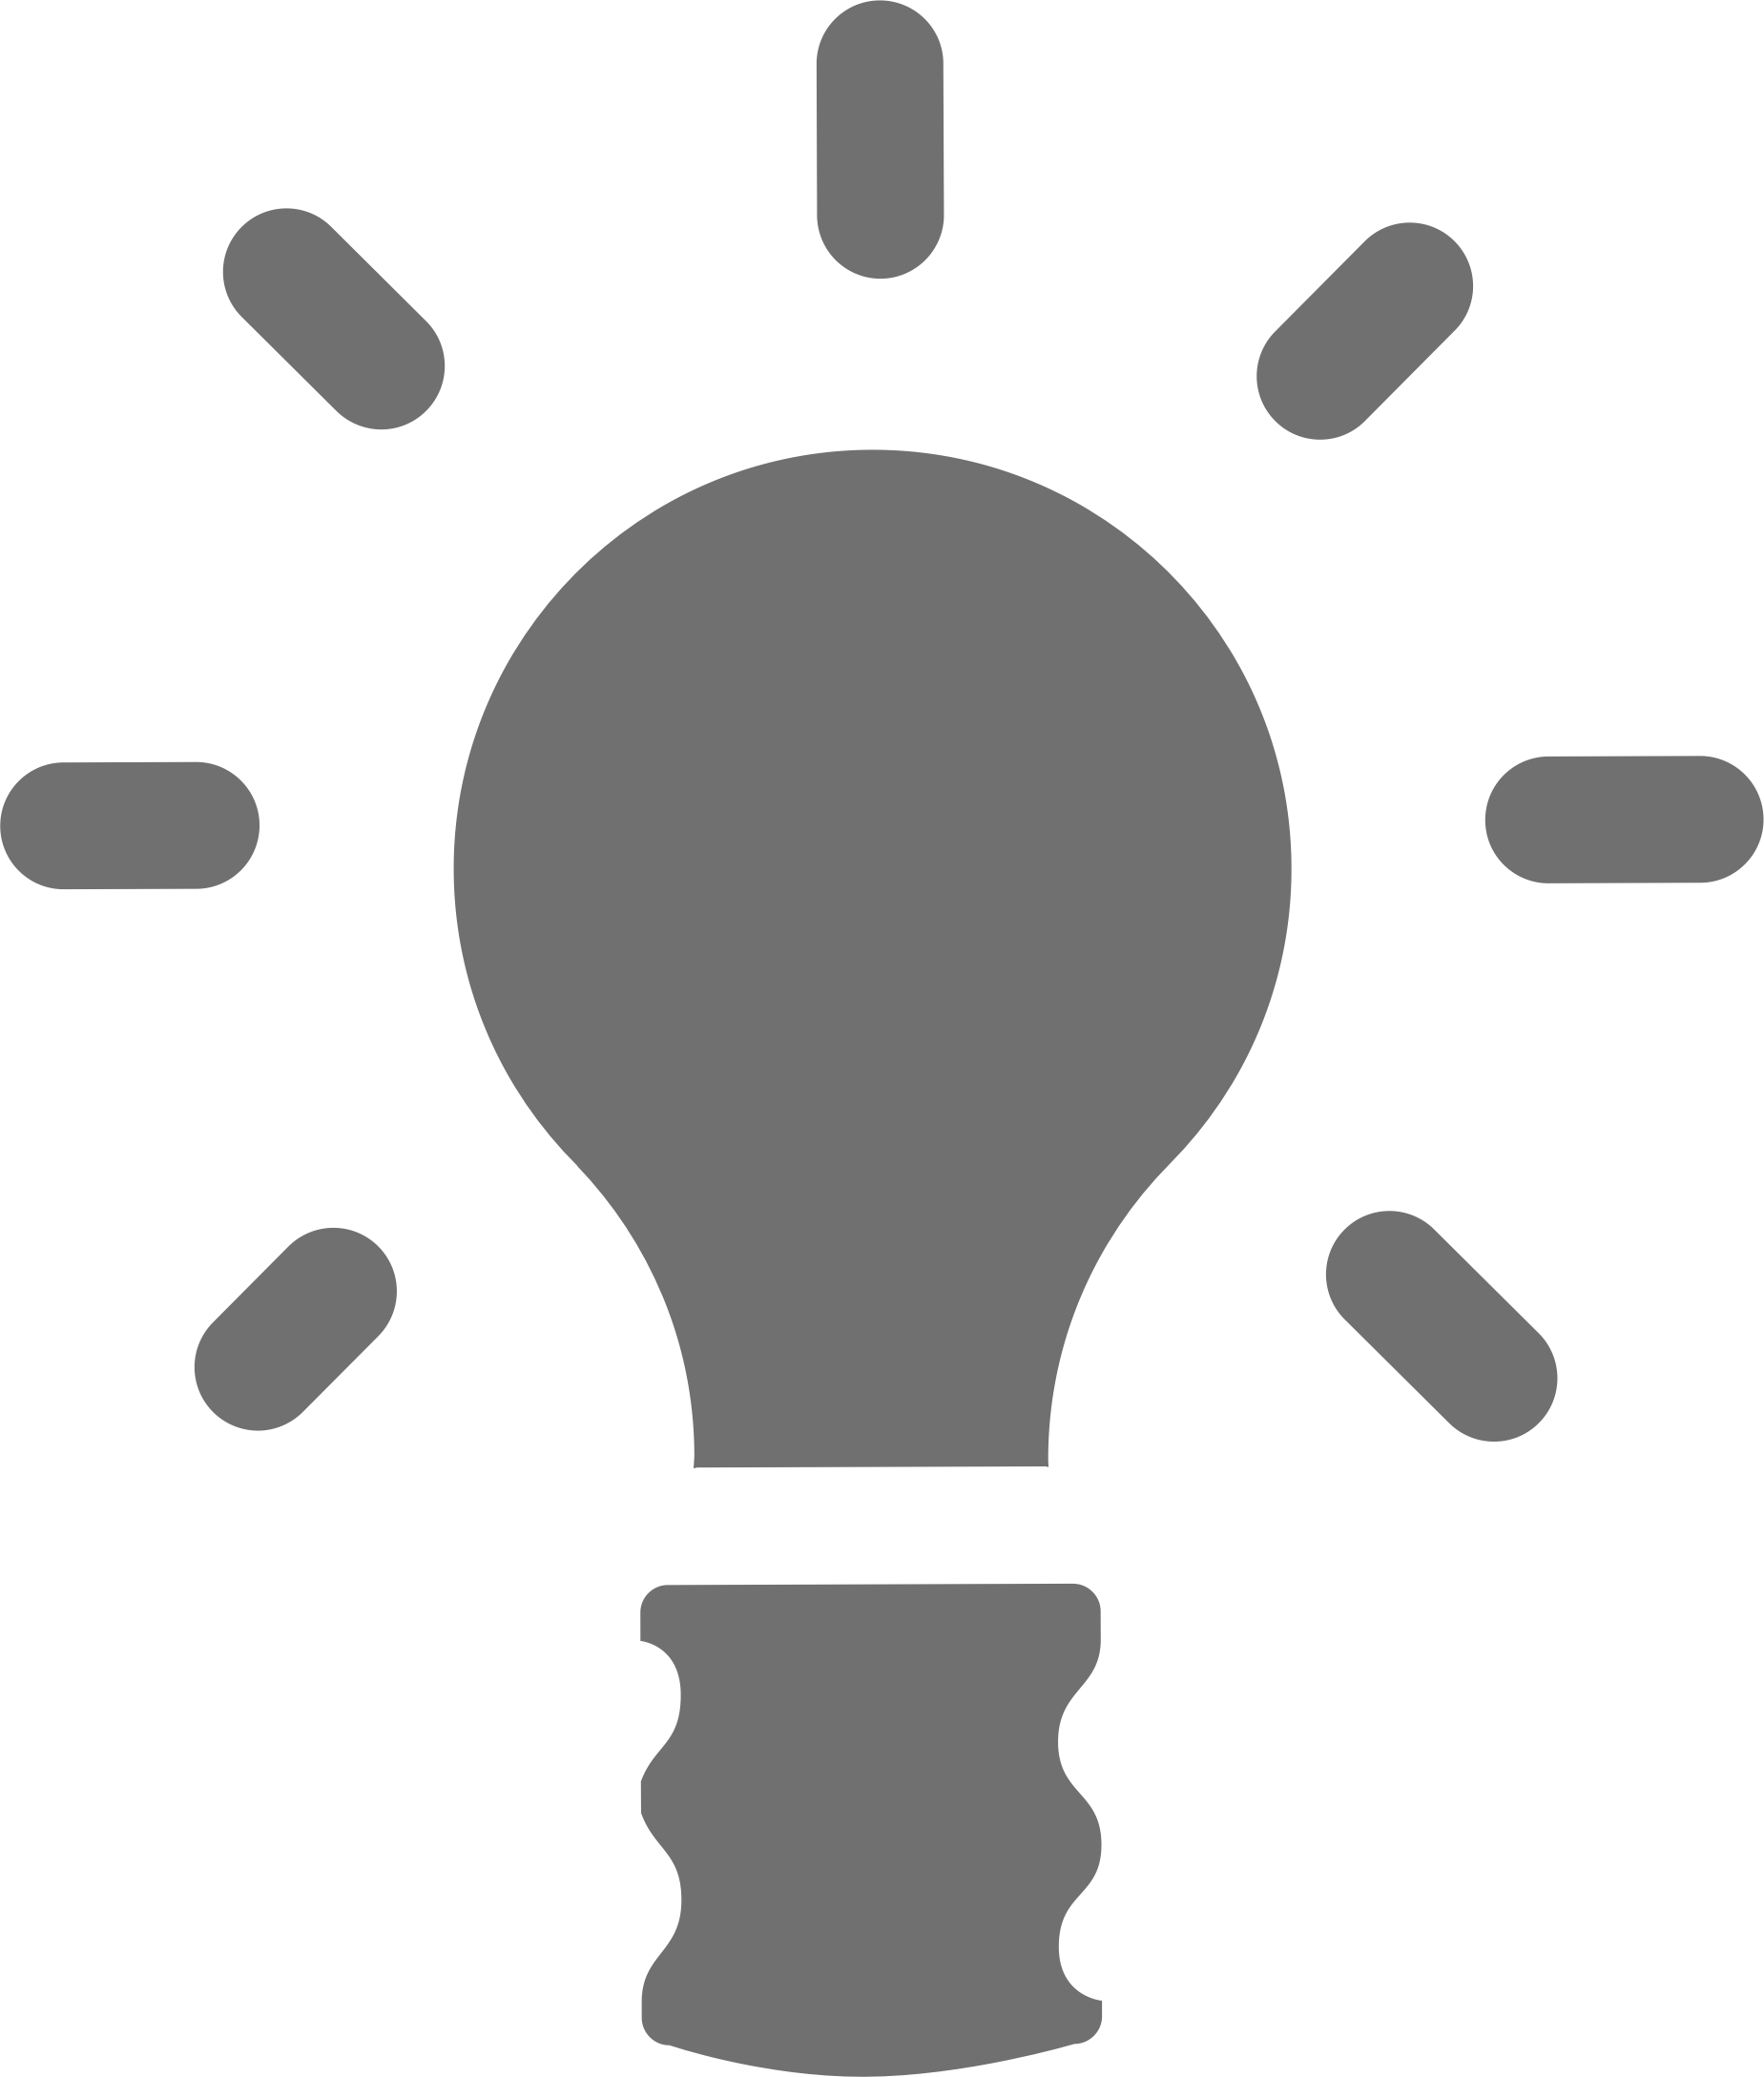 Big Image (Png) - Lamp Black And White, Transparent background PNG HD thumbnail